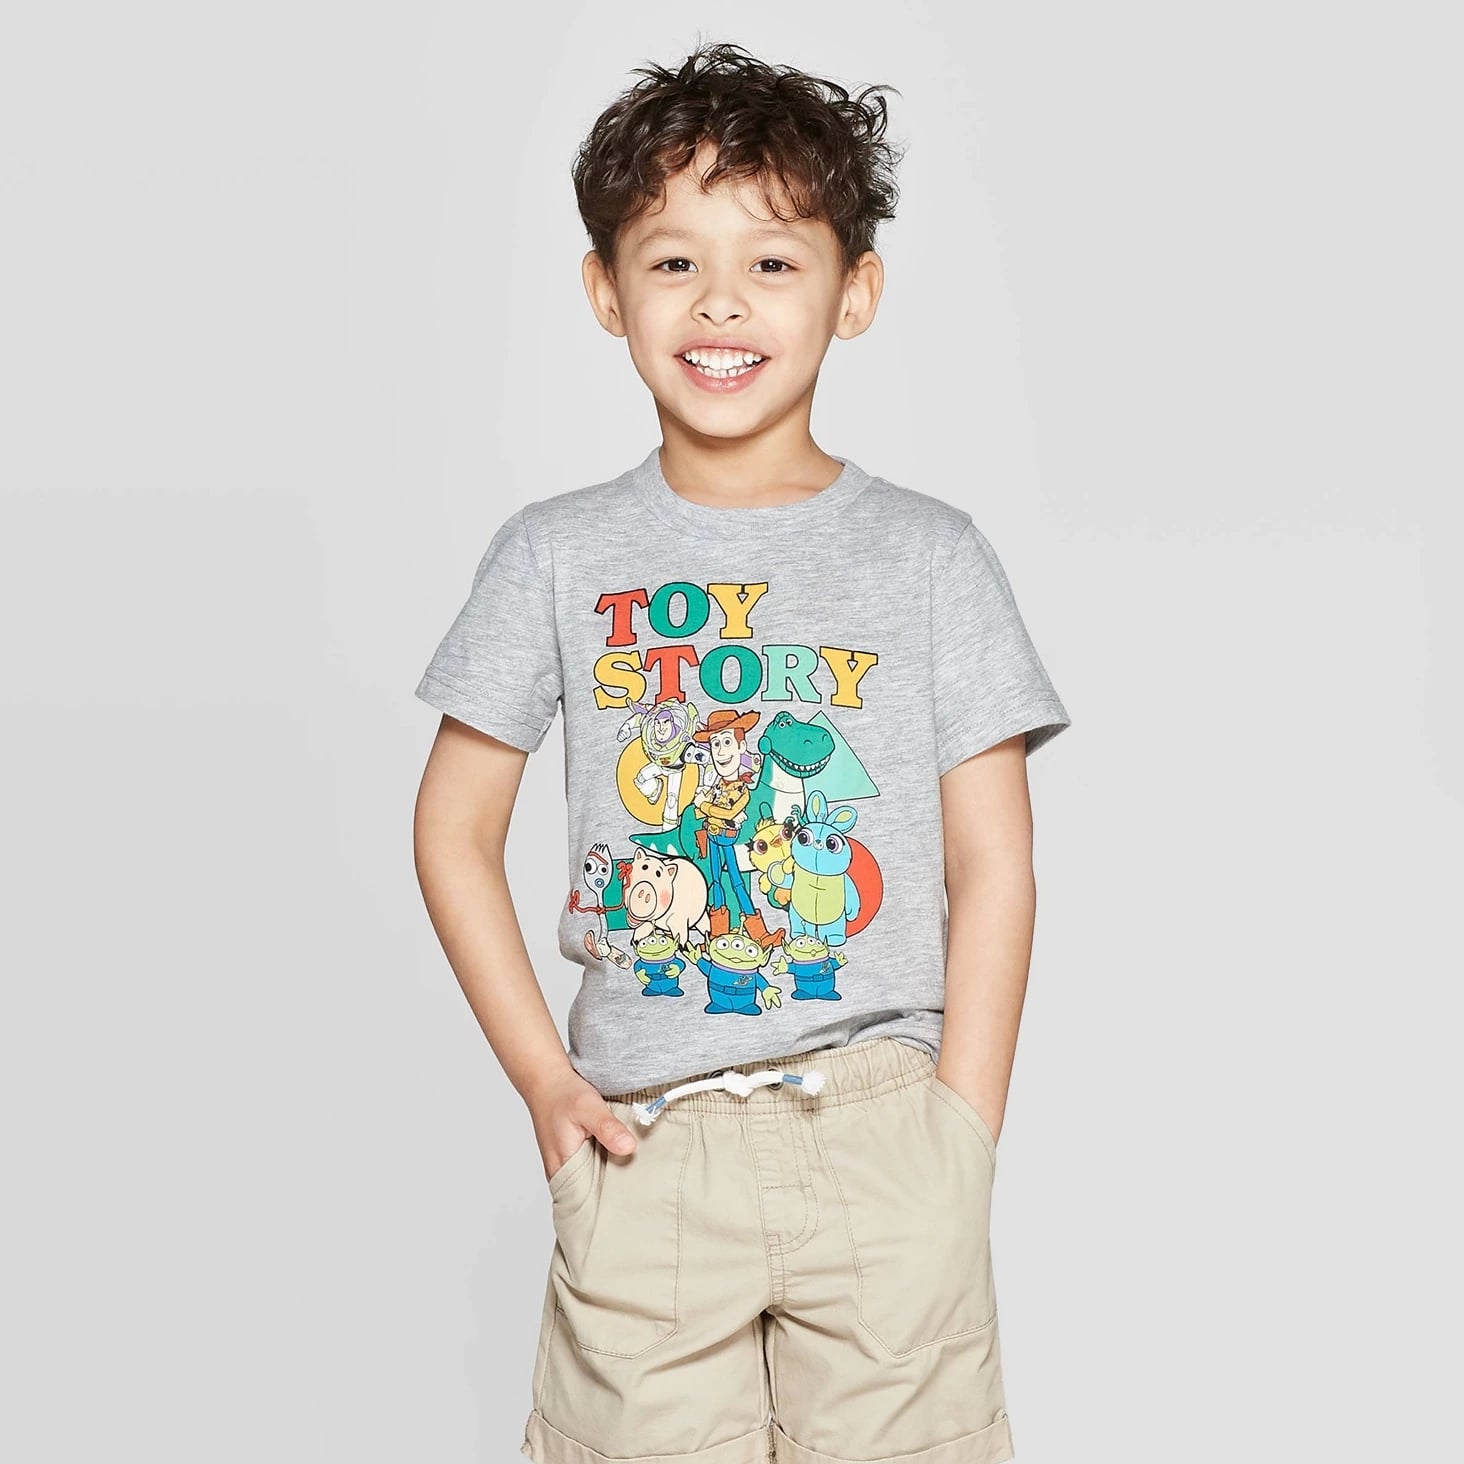 Boys toy story shirt Store